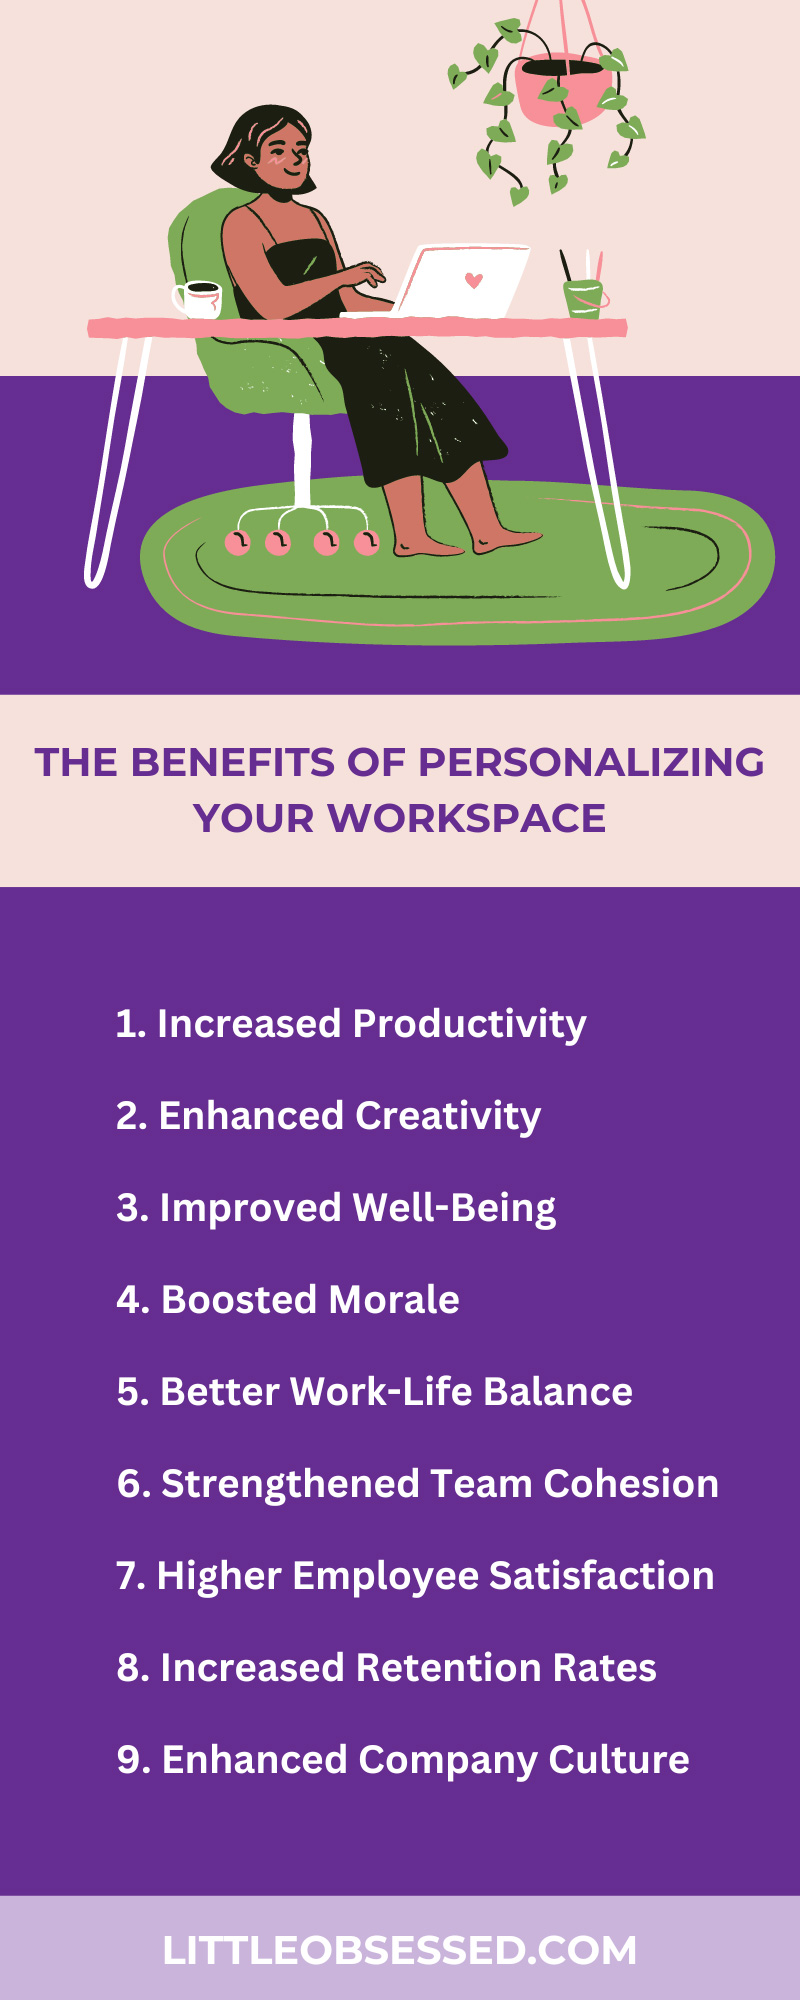 The Benefits of Personalizing Your Workspace